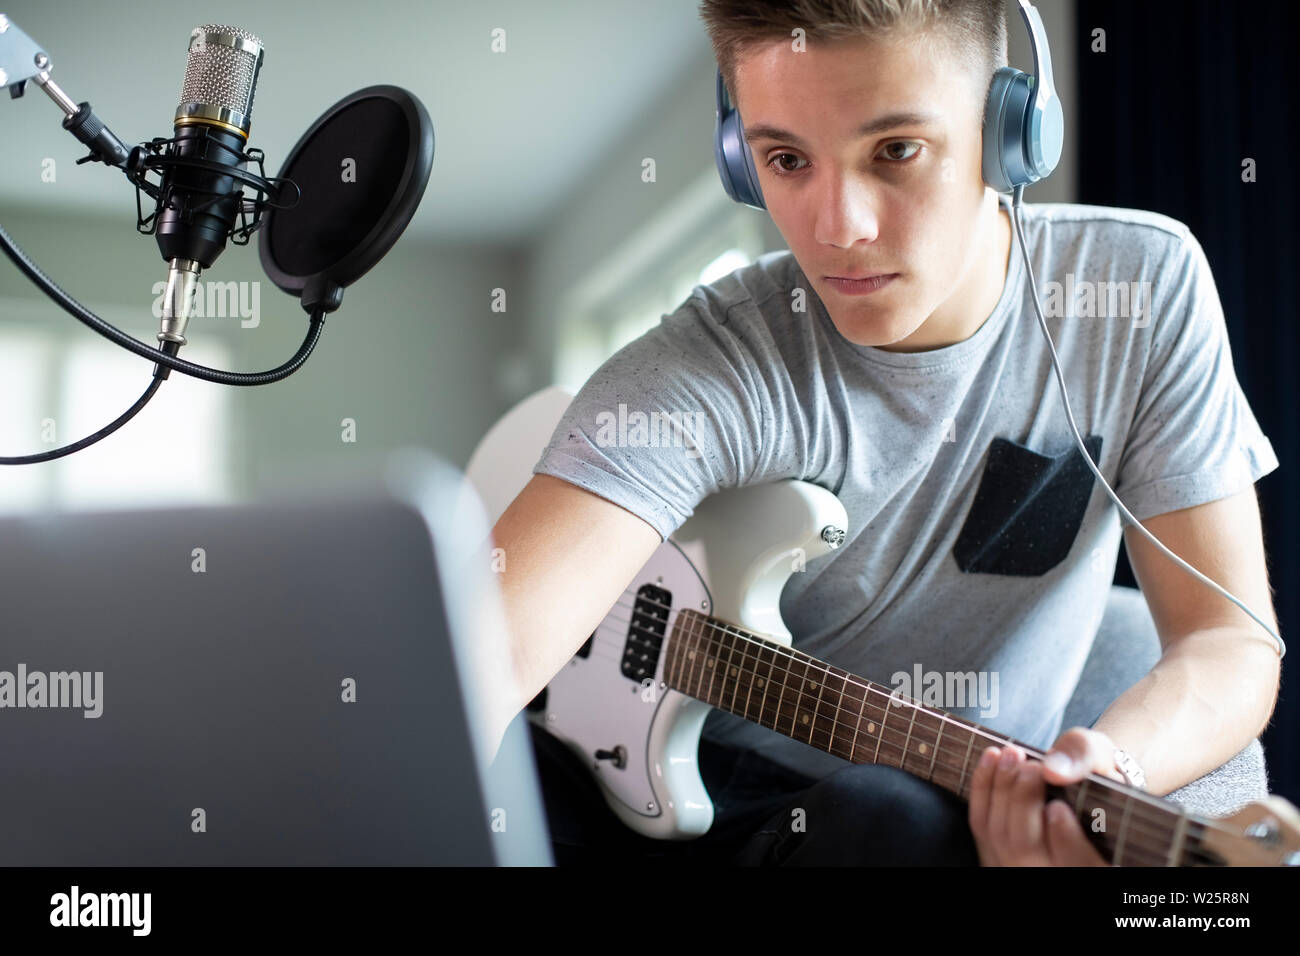 Teenage Boy Playing Guitar And Recording Music Onto Laptop At Home Stock Photo